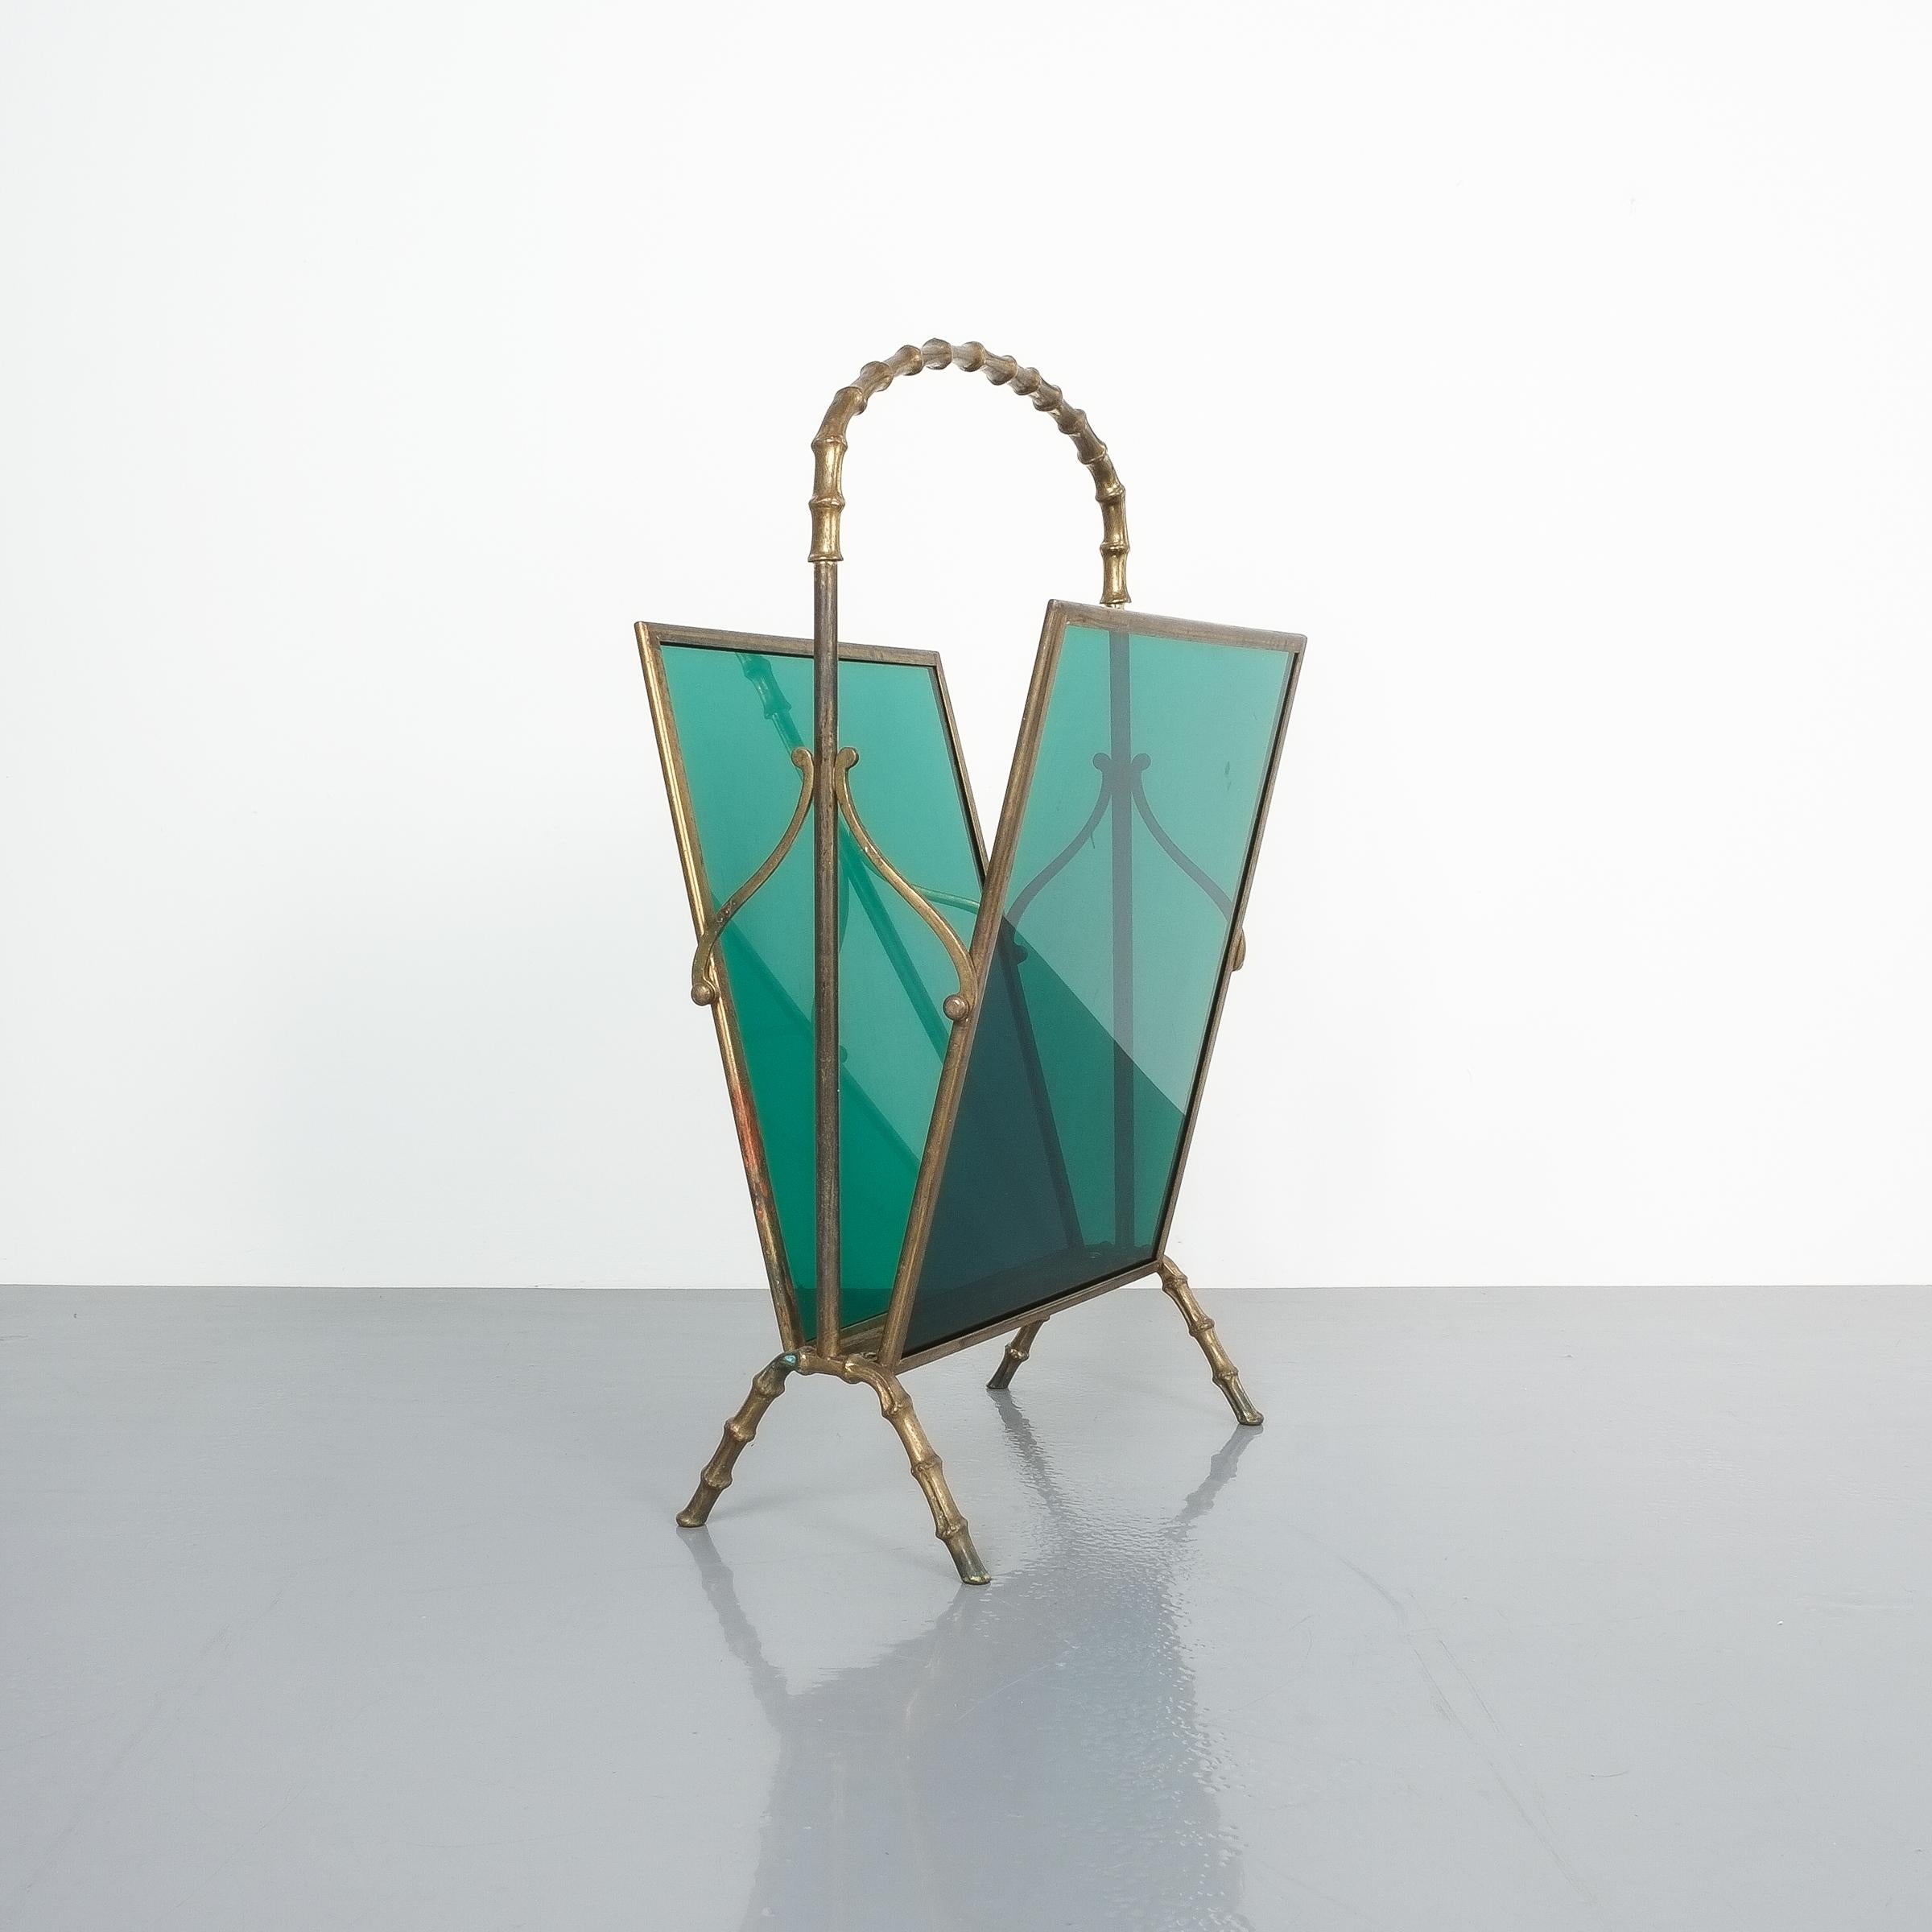 Maison Baguès attributed faux bamboo green Lucite magazine rack. Delicate magazine rack comprised of brass and green Lucite panels. The rack is in good condition with some patina to the brass.